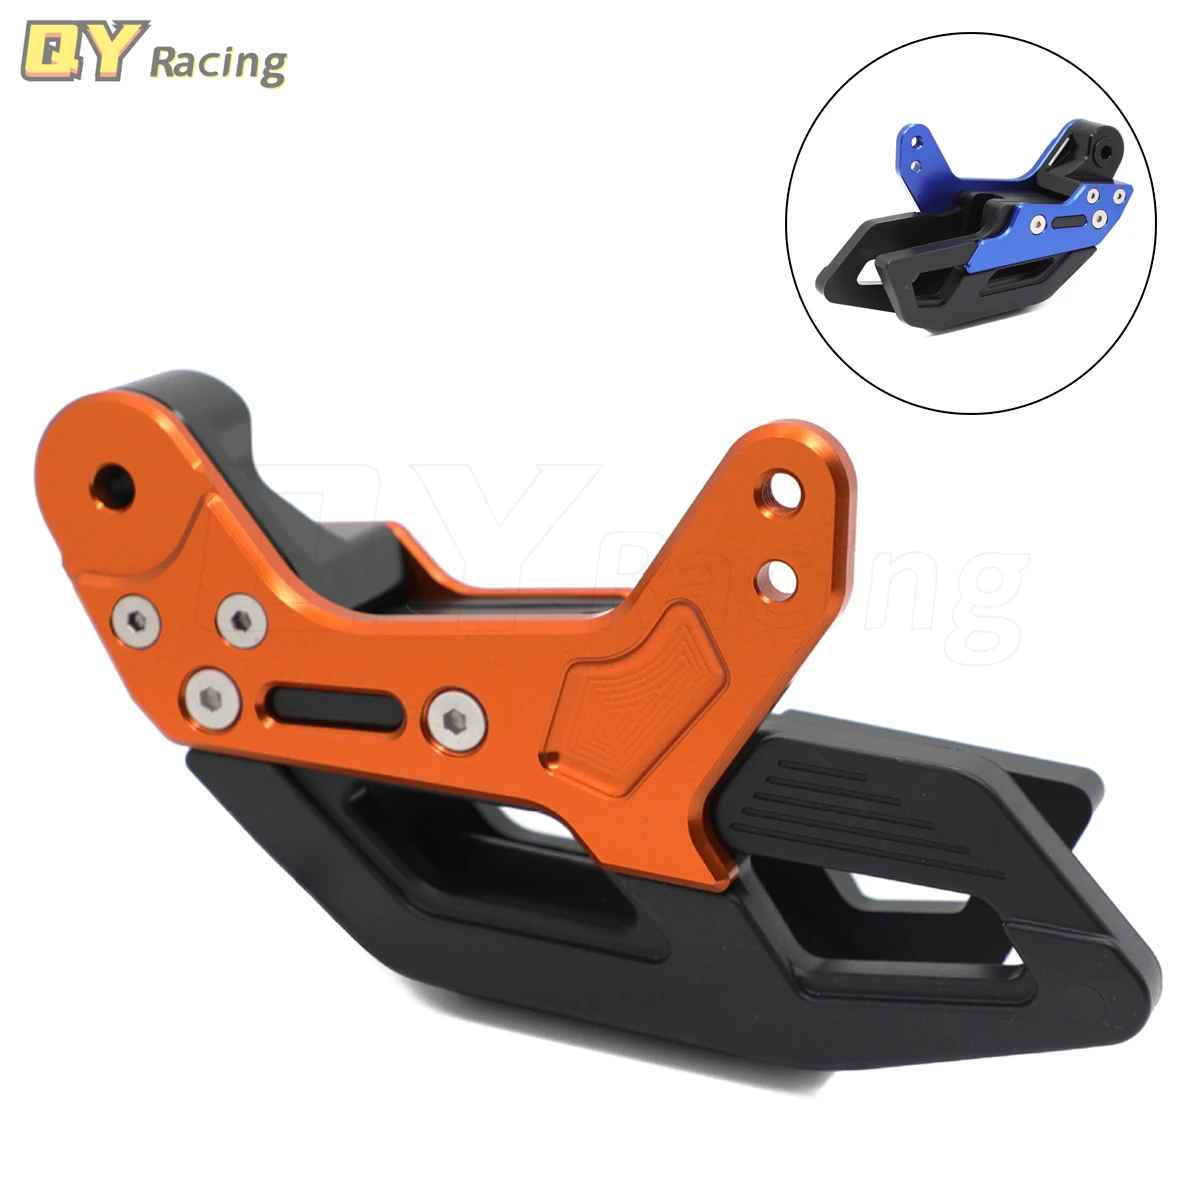 

Chain Guide Guard For KTM SX SXF EXC EXCF XC XCW XCF XCFW 690 Enduro SMC SMR For Husaber Husqvarn 125 150 200 250 350 450 530